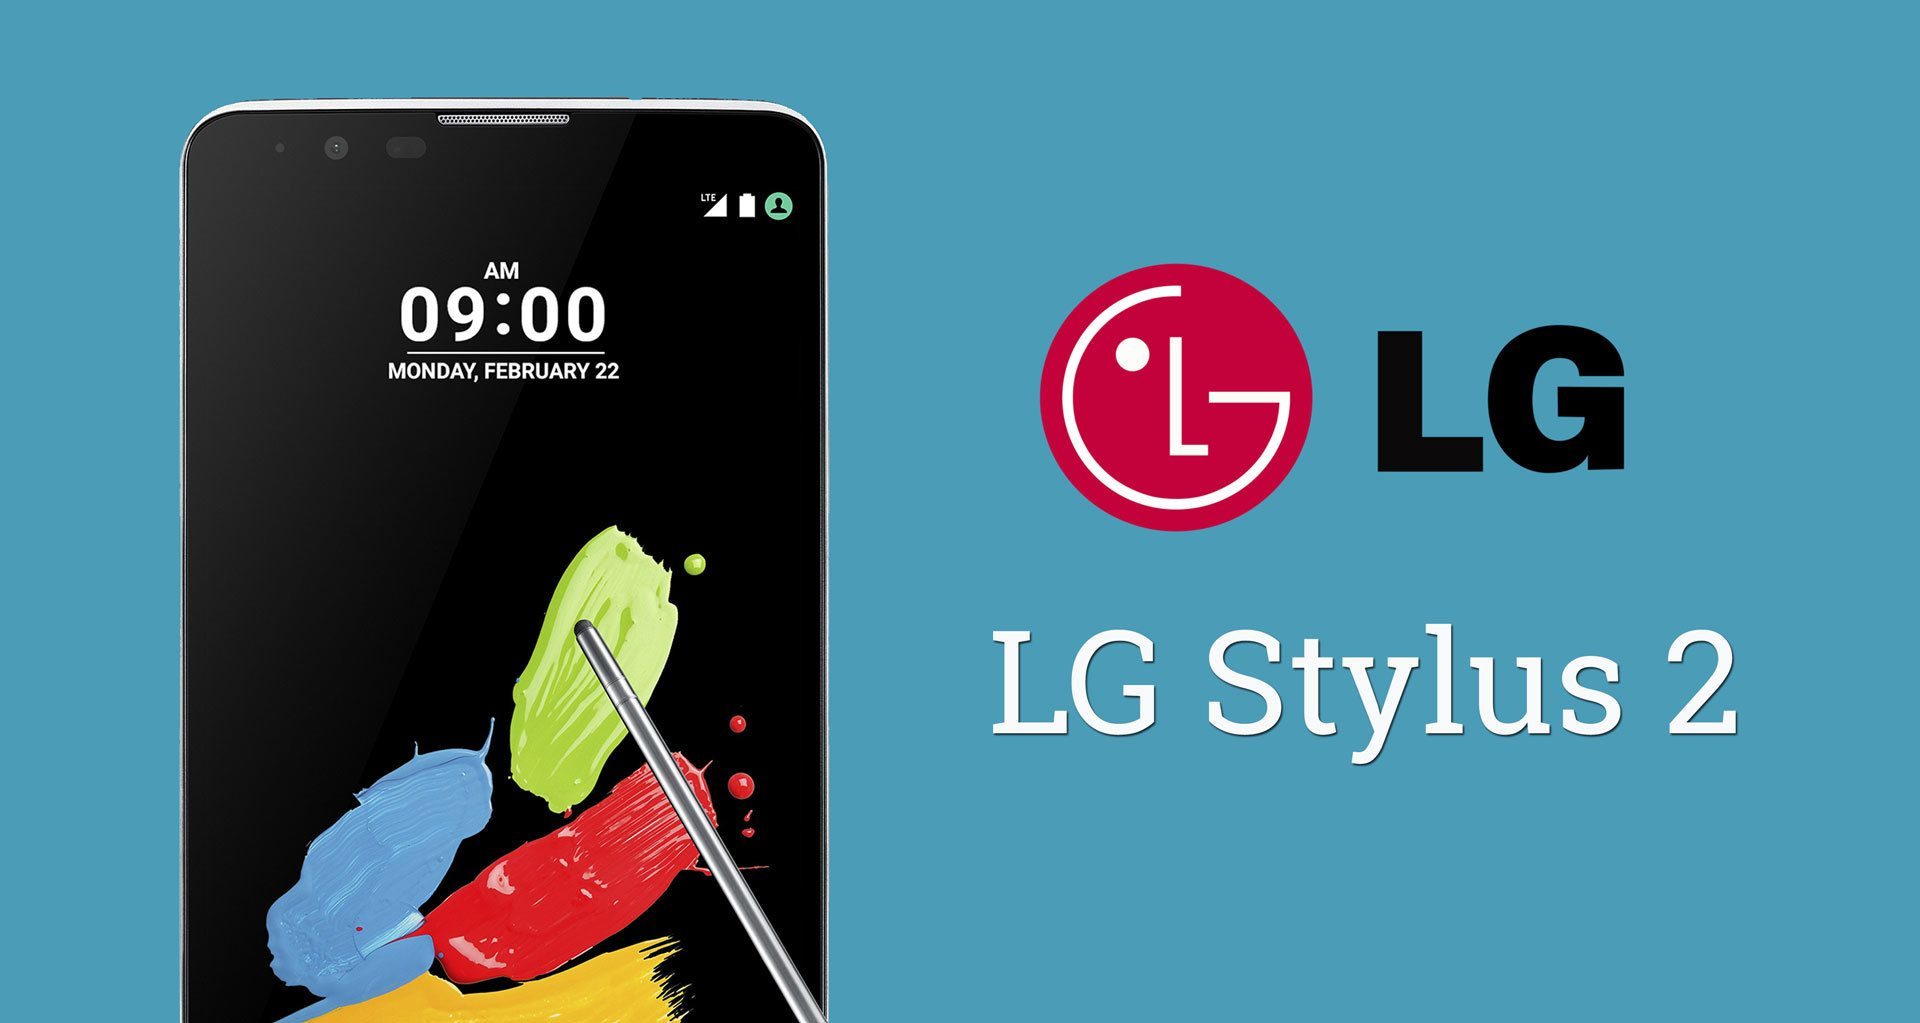 LG Stylus 2 Features DAB +